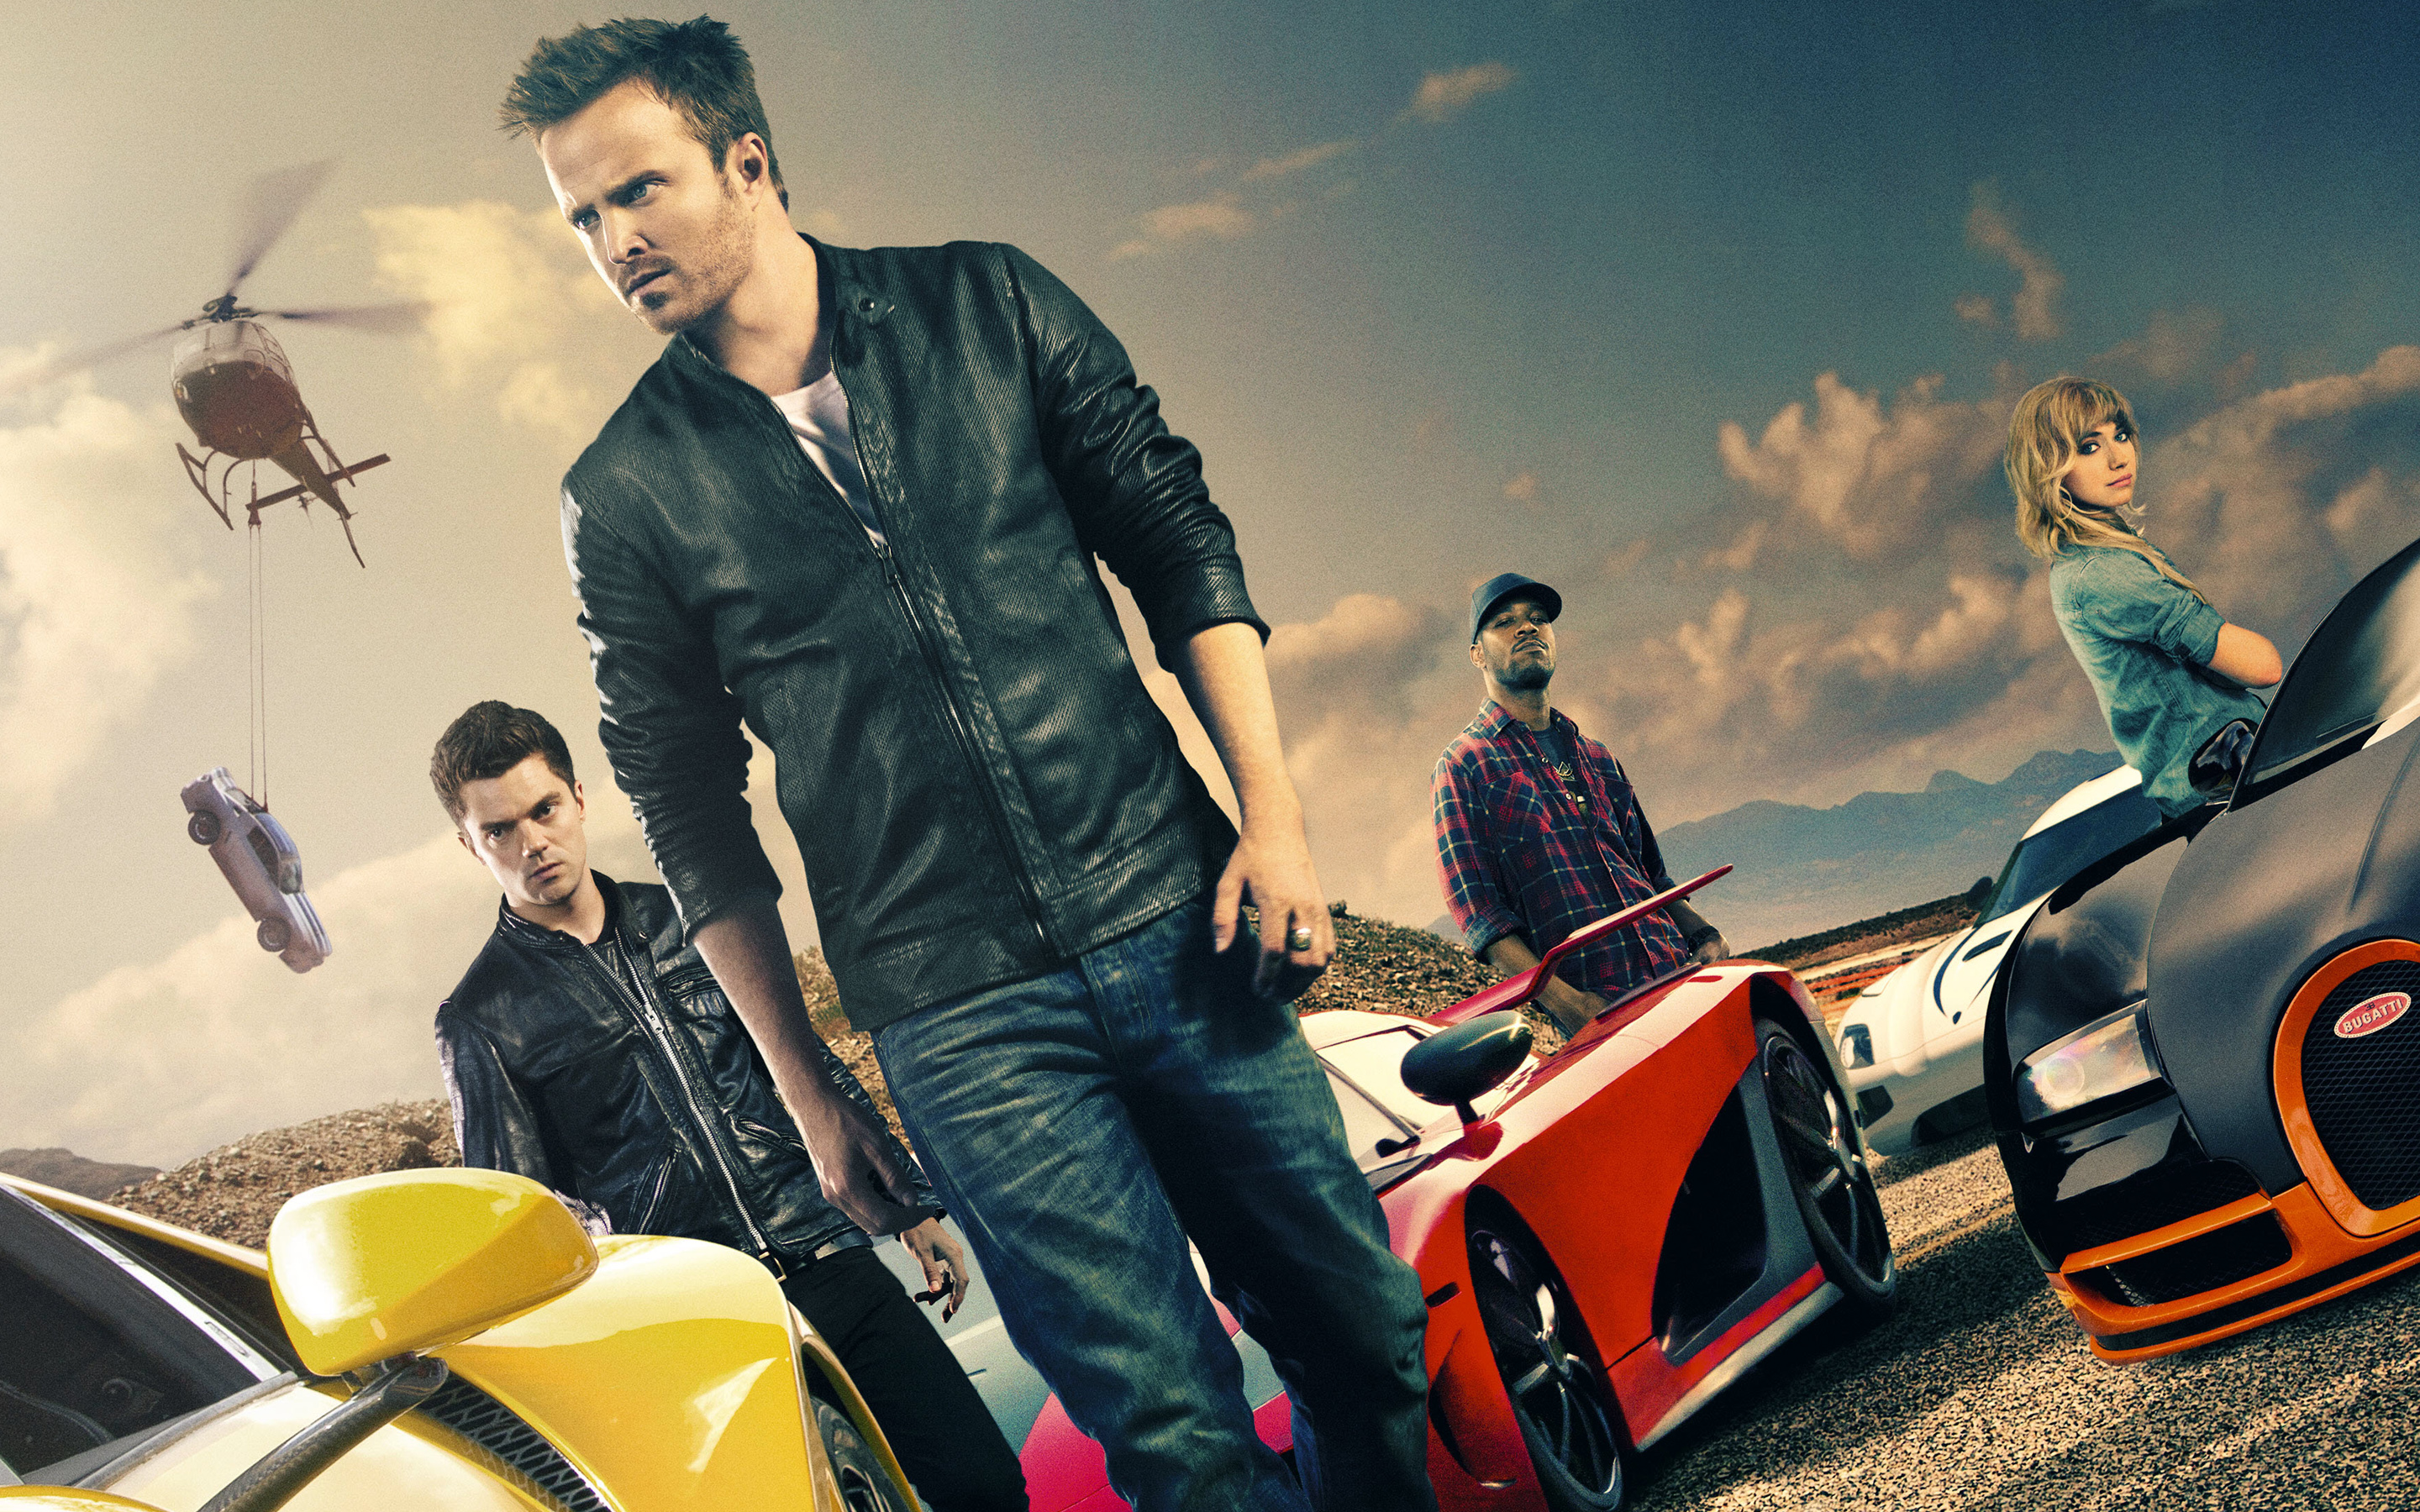 Need for Speed movie getting 3D release – Eggplante!